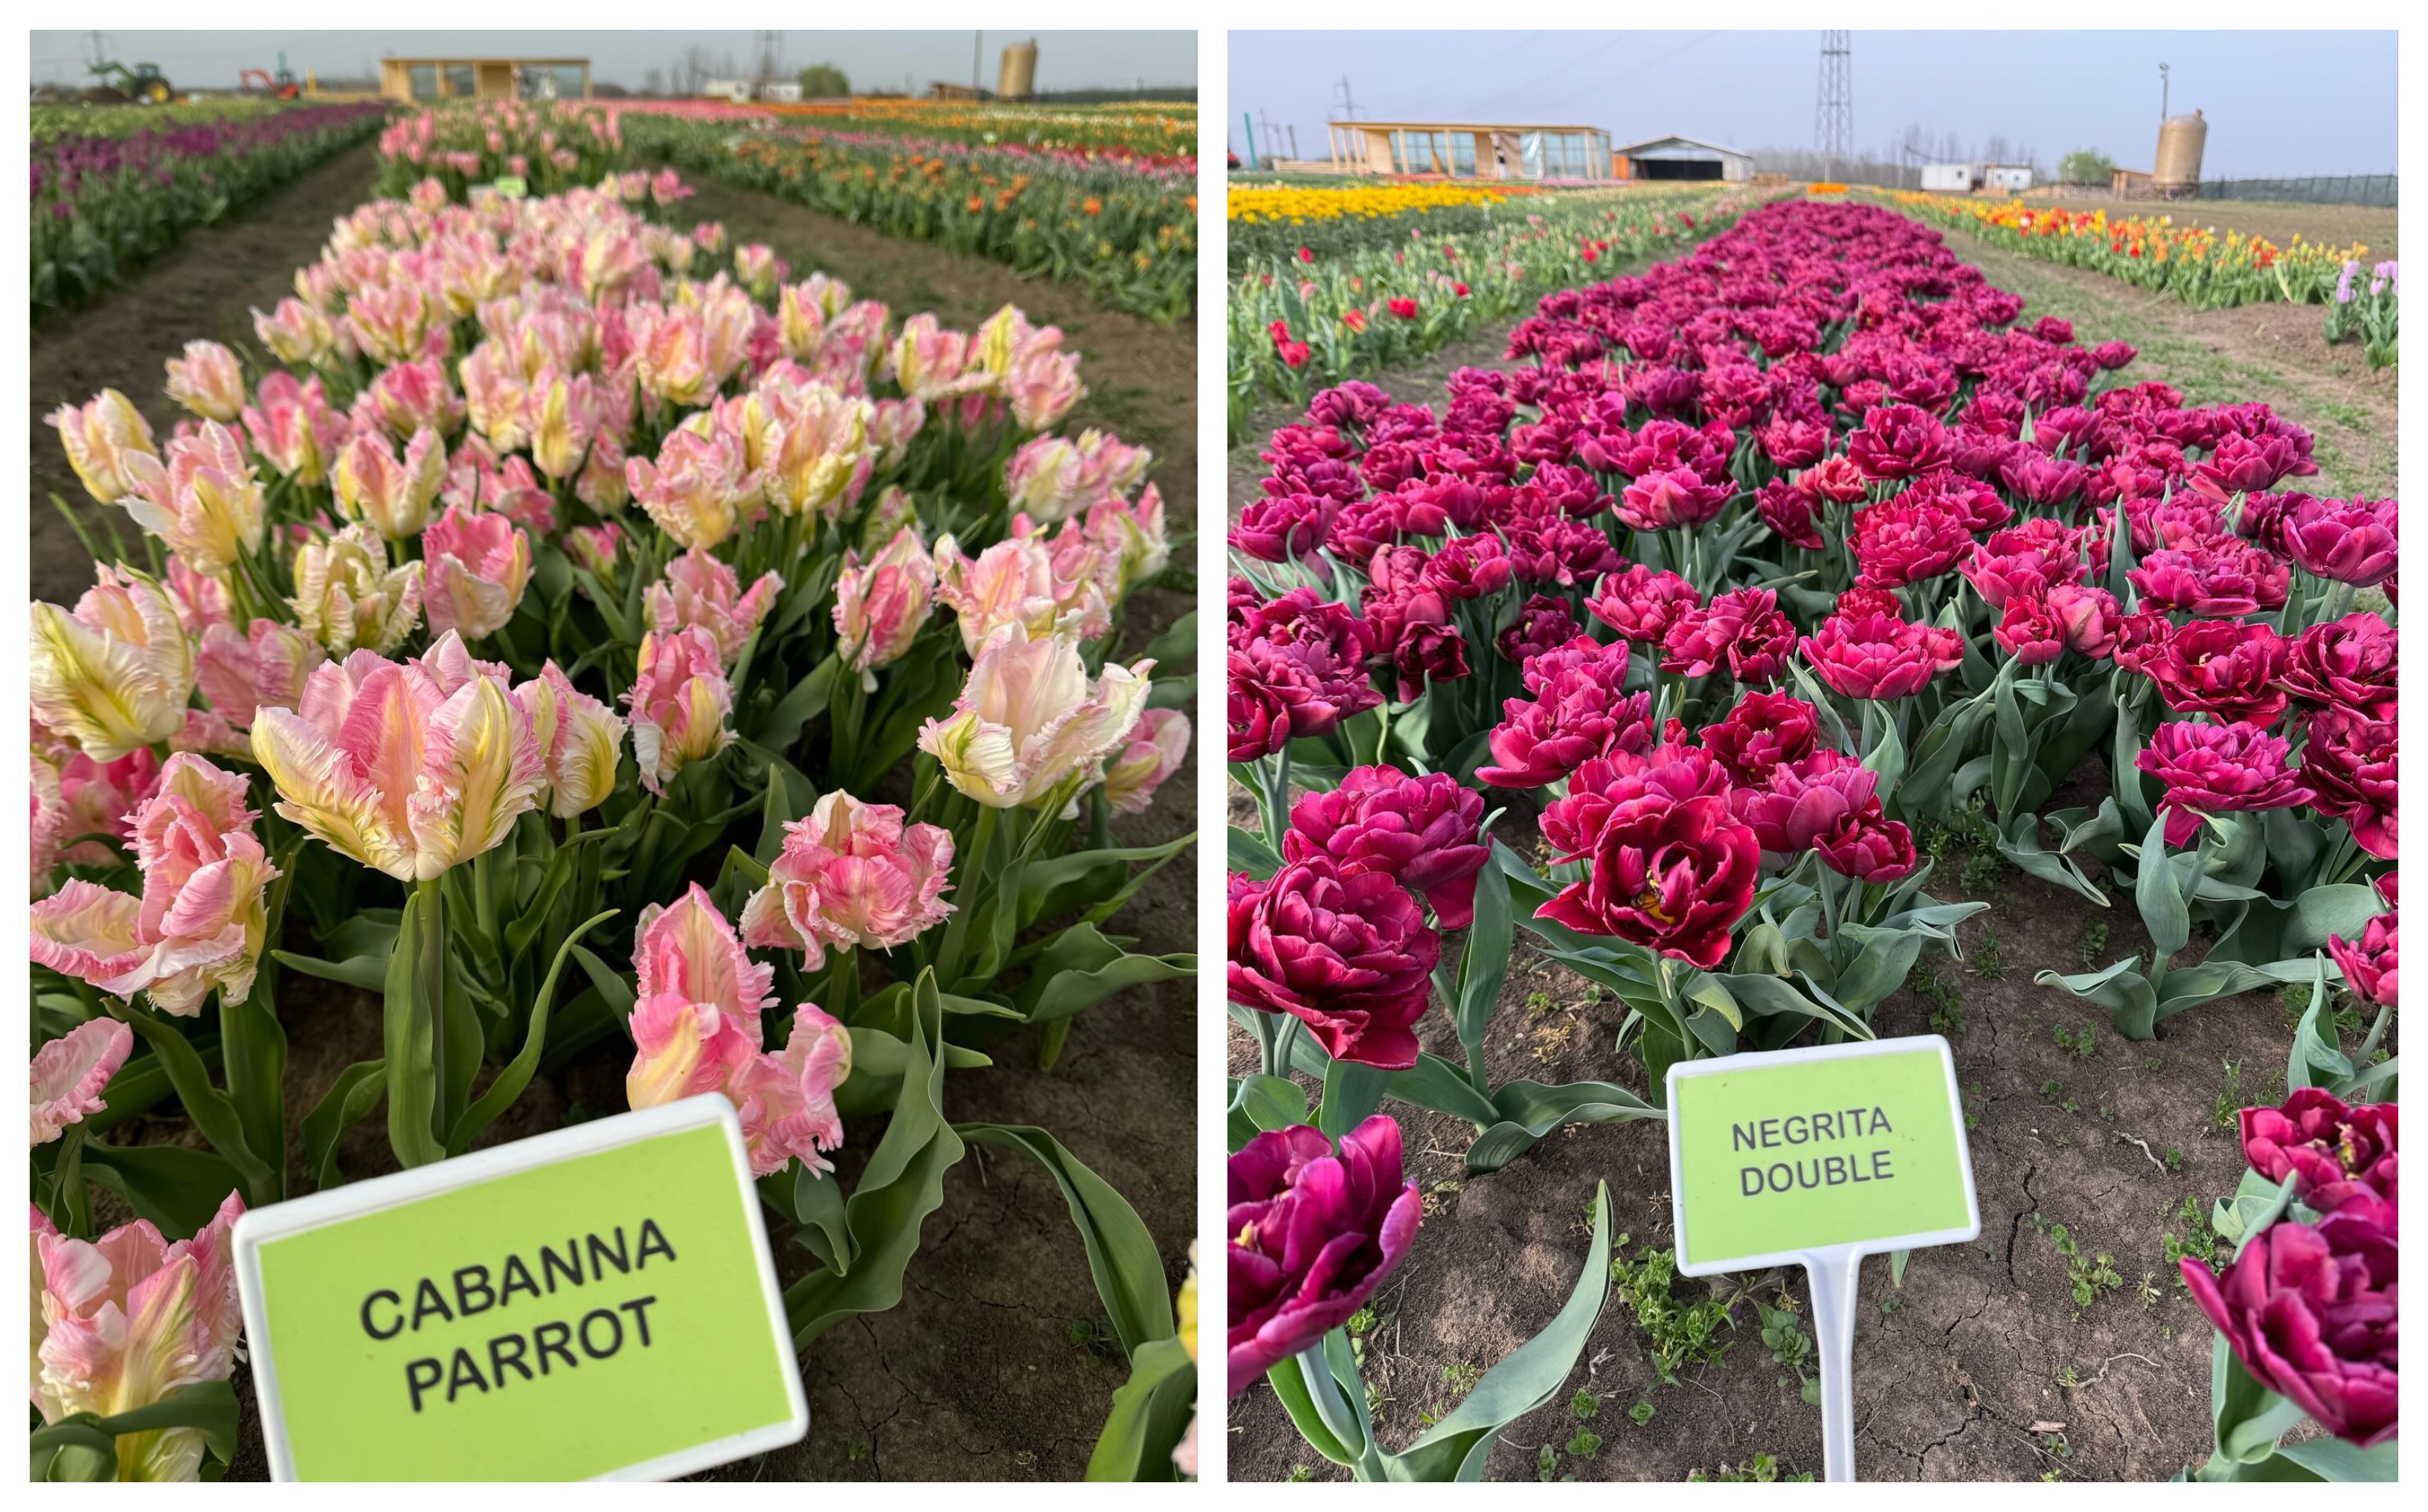 Nearly 600 varieties of tulips on display in Romanian village